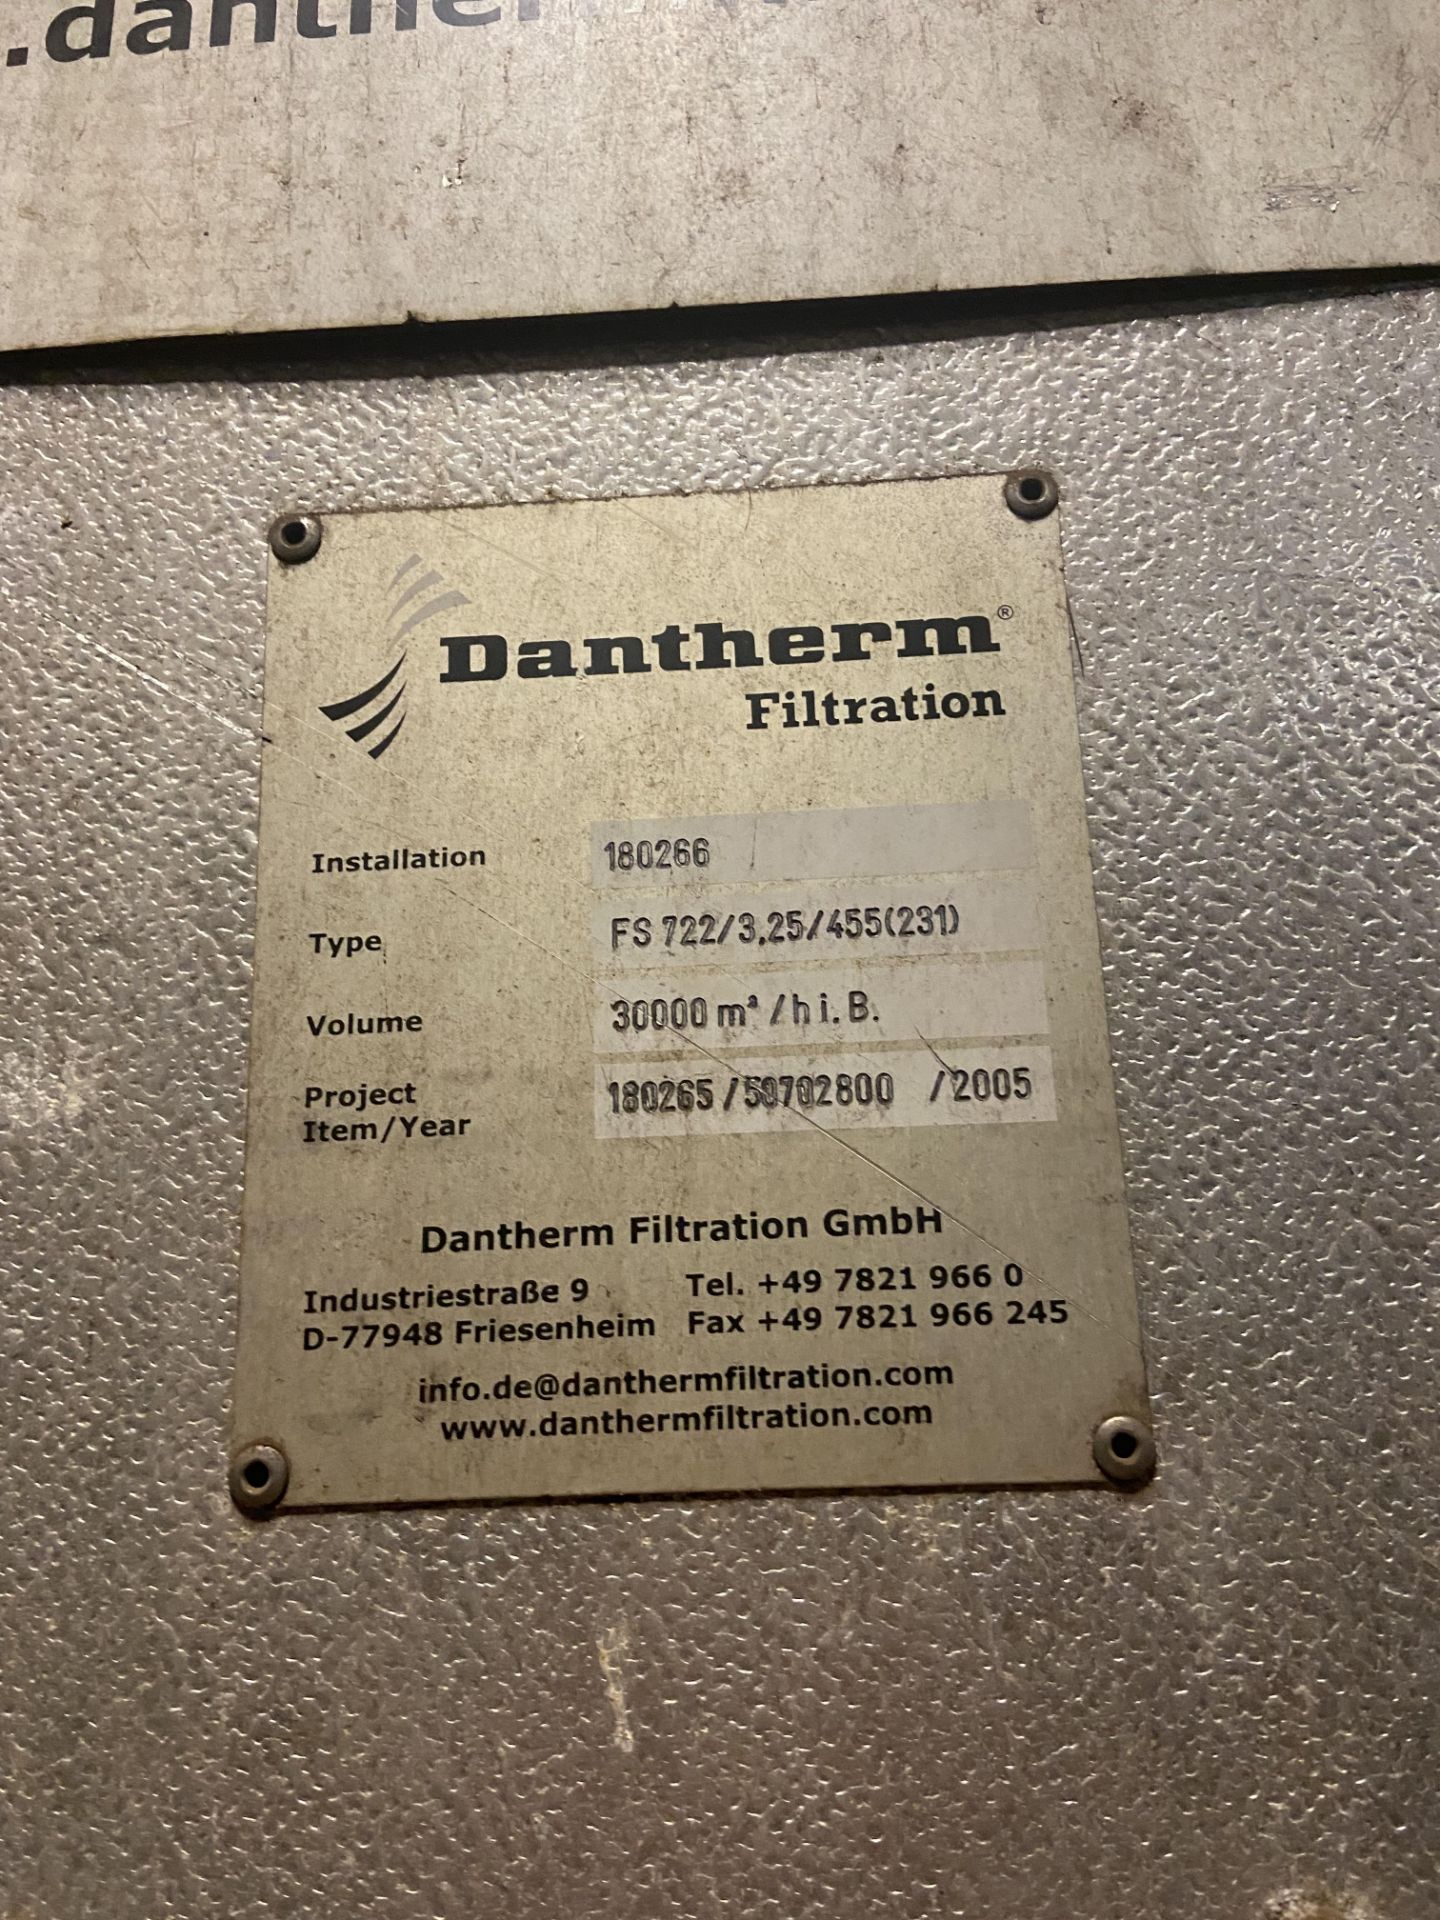 Dantherm FS722/3.25/455(231) DUST COLLECTION UNIT, project item 180265/58702800, year of manufacture - Image 6 of 6